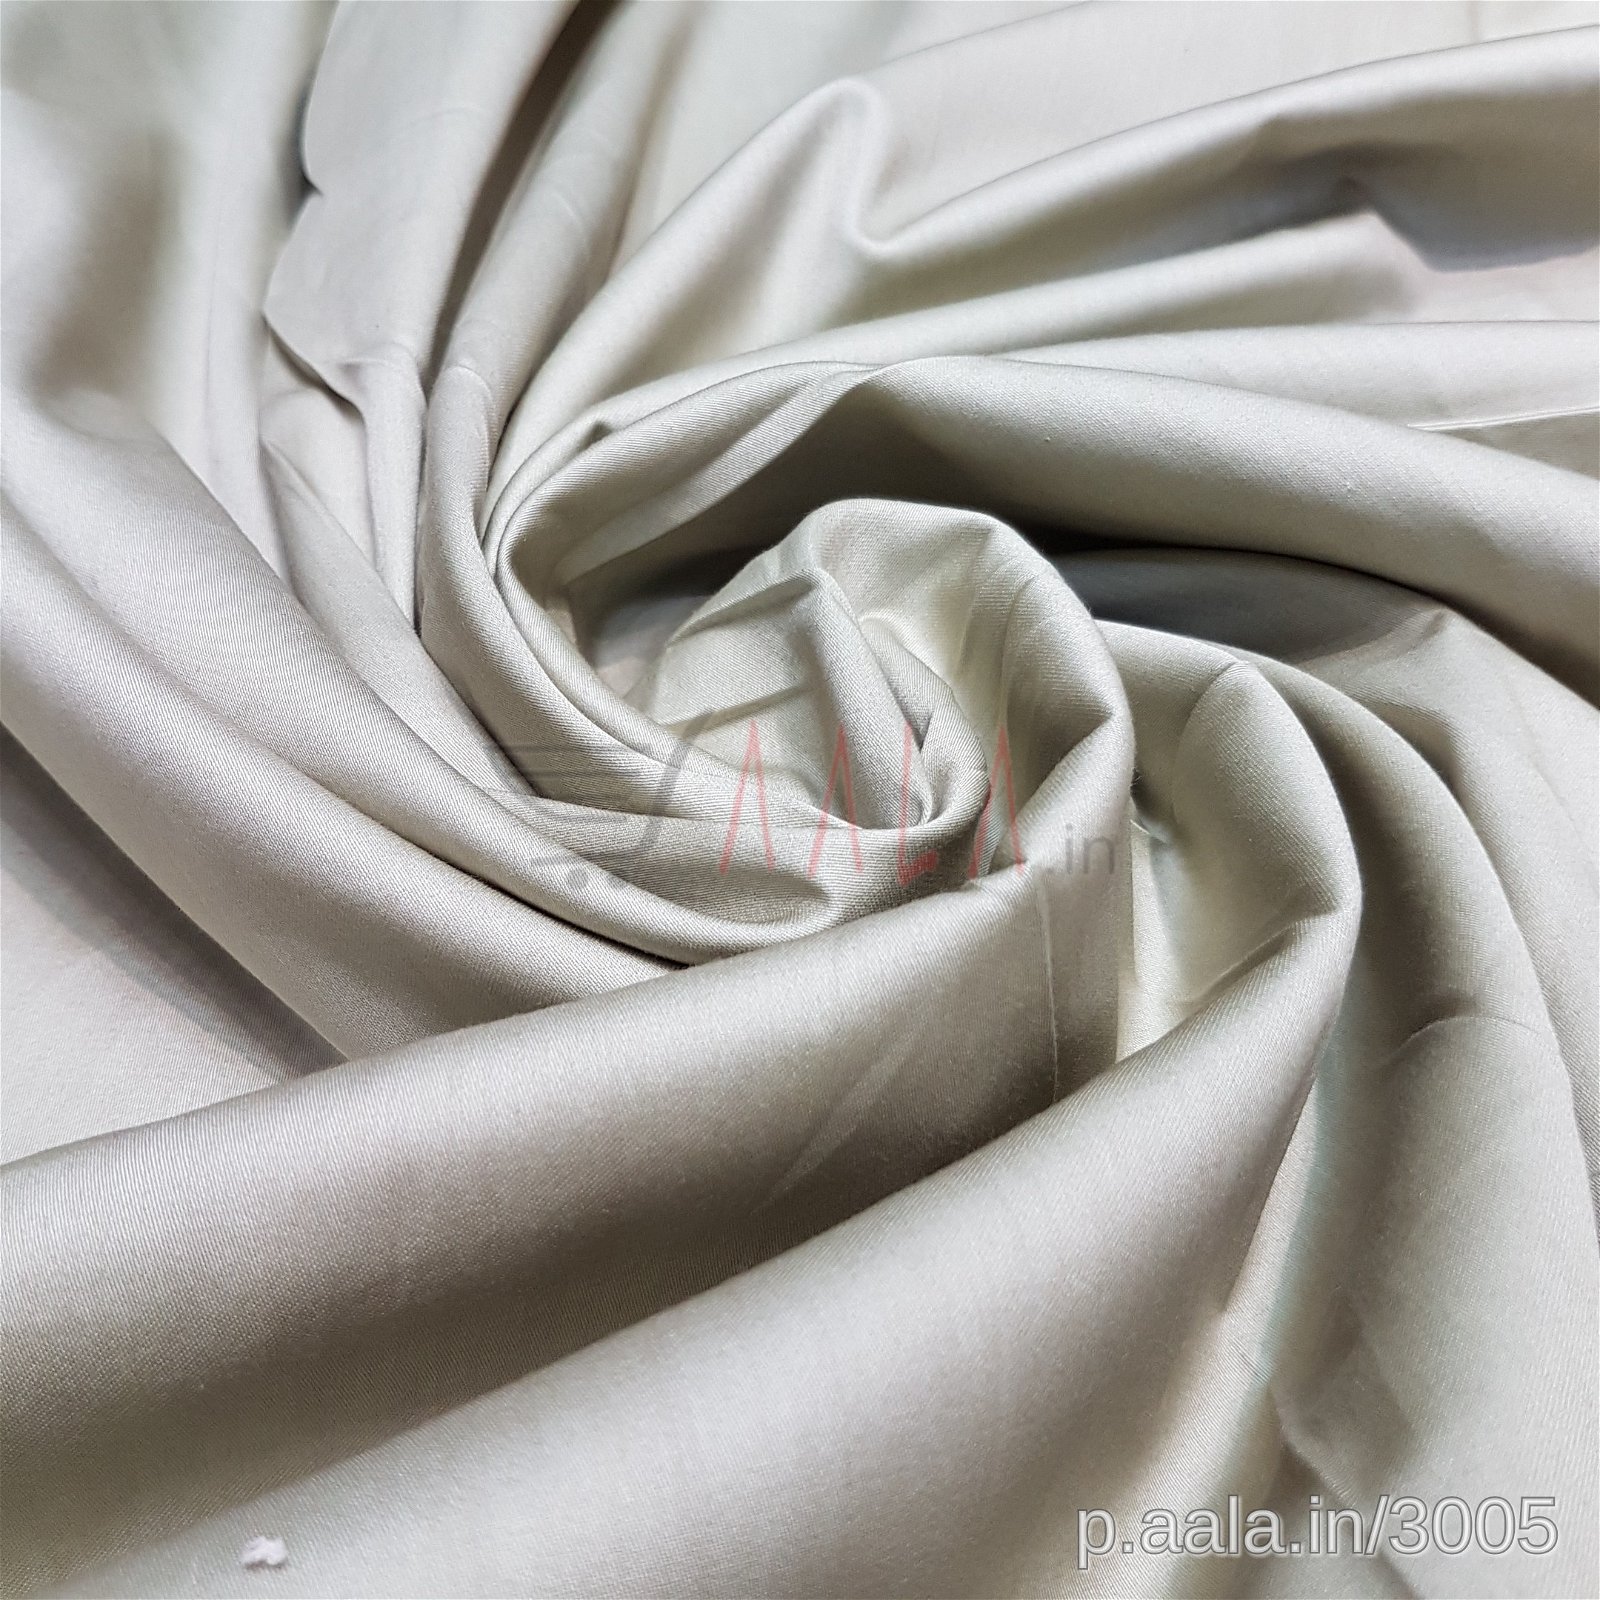 Satin Cotton 44 Inches Dyed Per Metre #3005